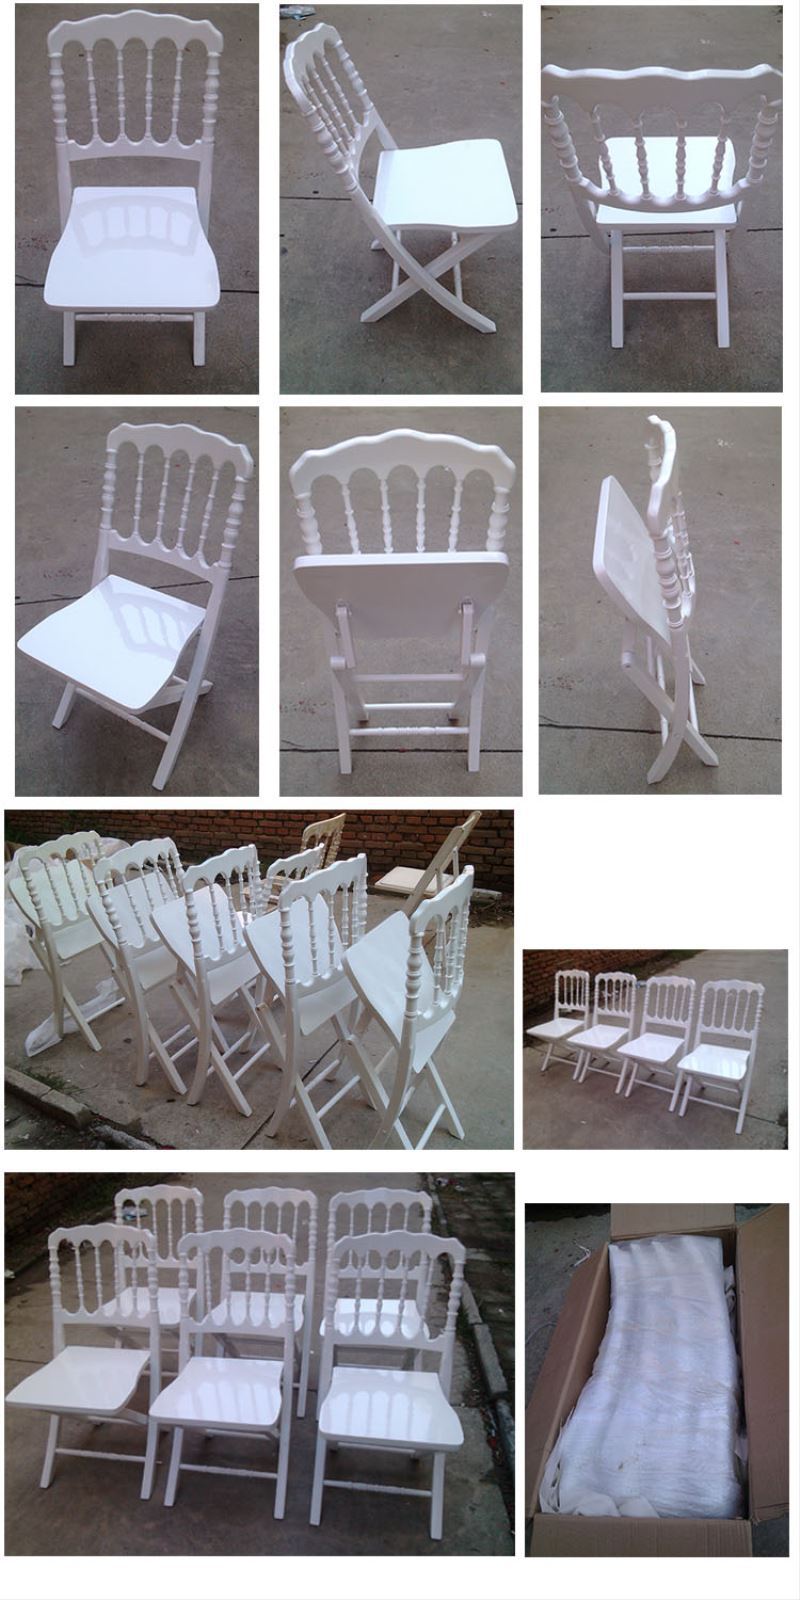 Beech Wood south africa padded folding chair for various venues